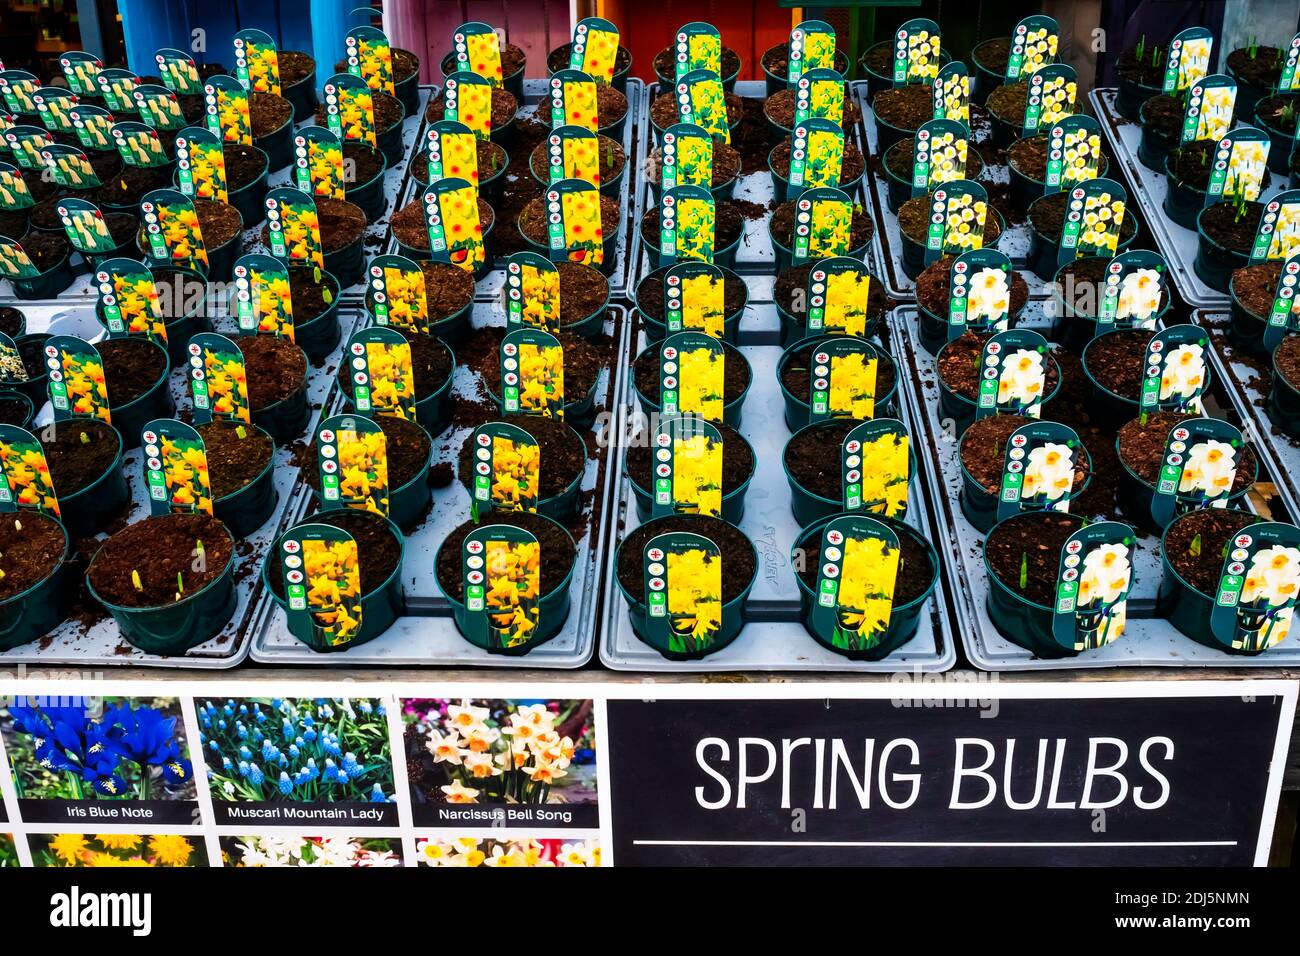 Garden Centre display Spring Bulbs Narcissus Rip van Winkle, Jumblie and  Bell Song for sale as bedding plants for spring planting Stock Photo